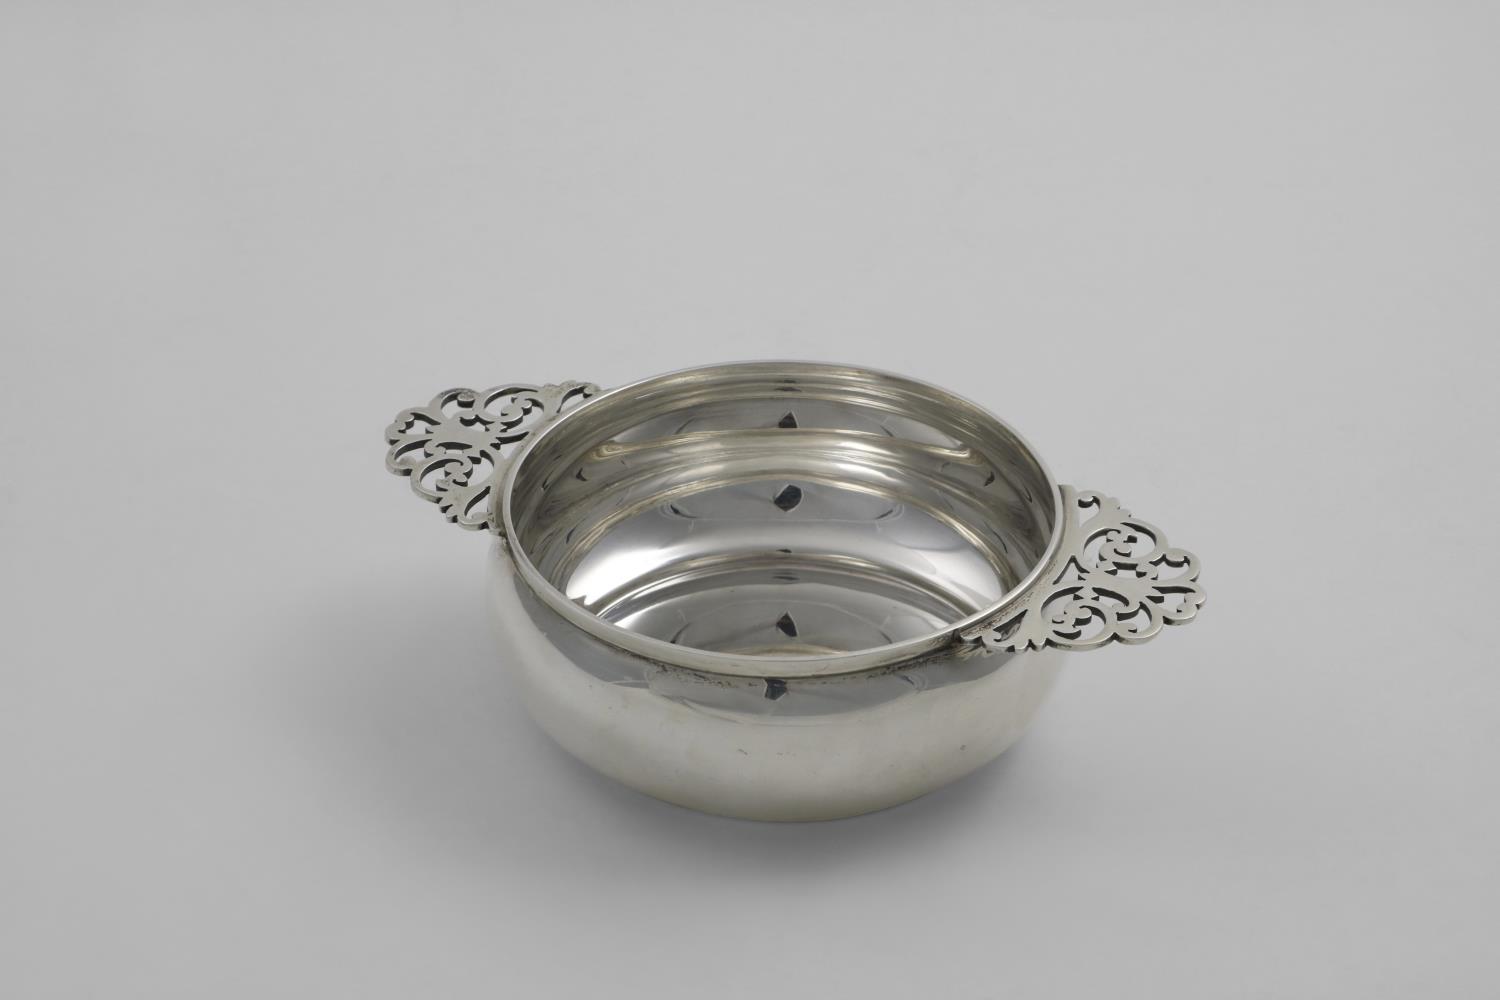 A LATE VICTORIAN SCOTTISH NUT DISH plain squat circular form with two pierced handles, initialled "